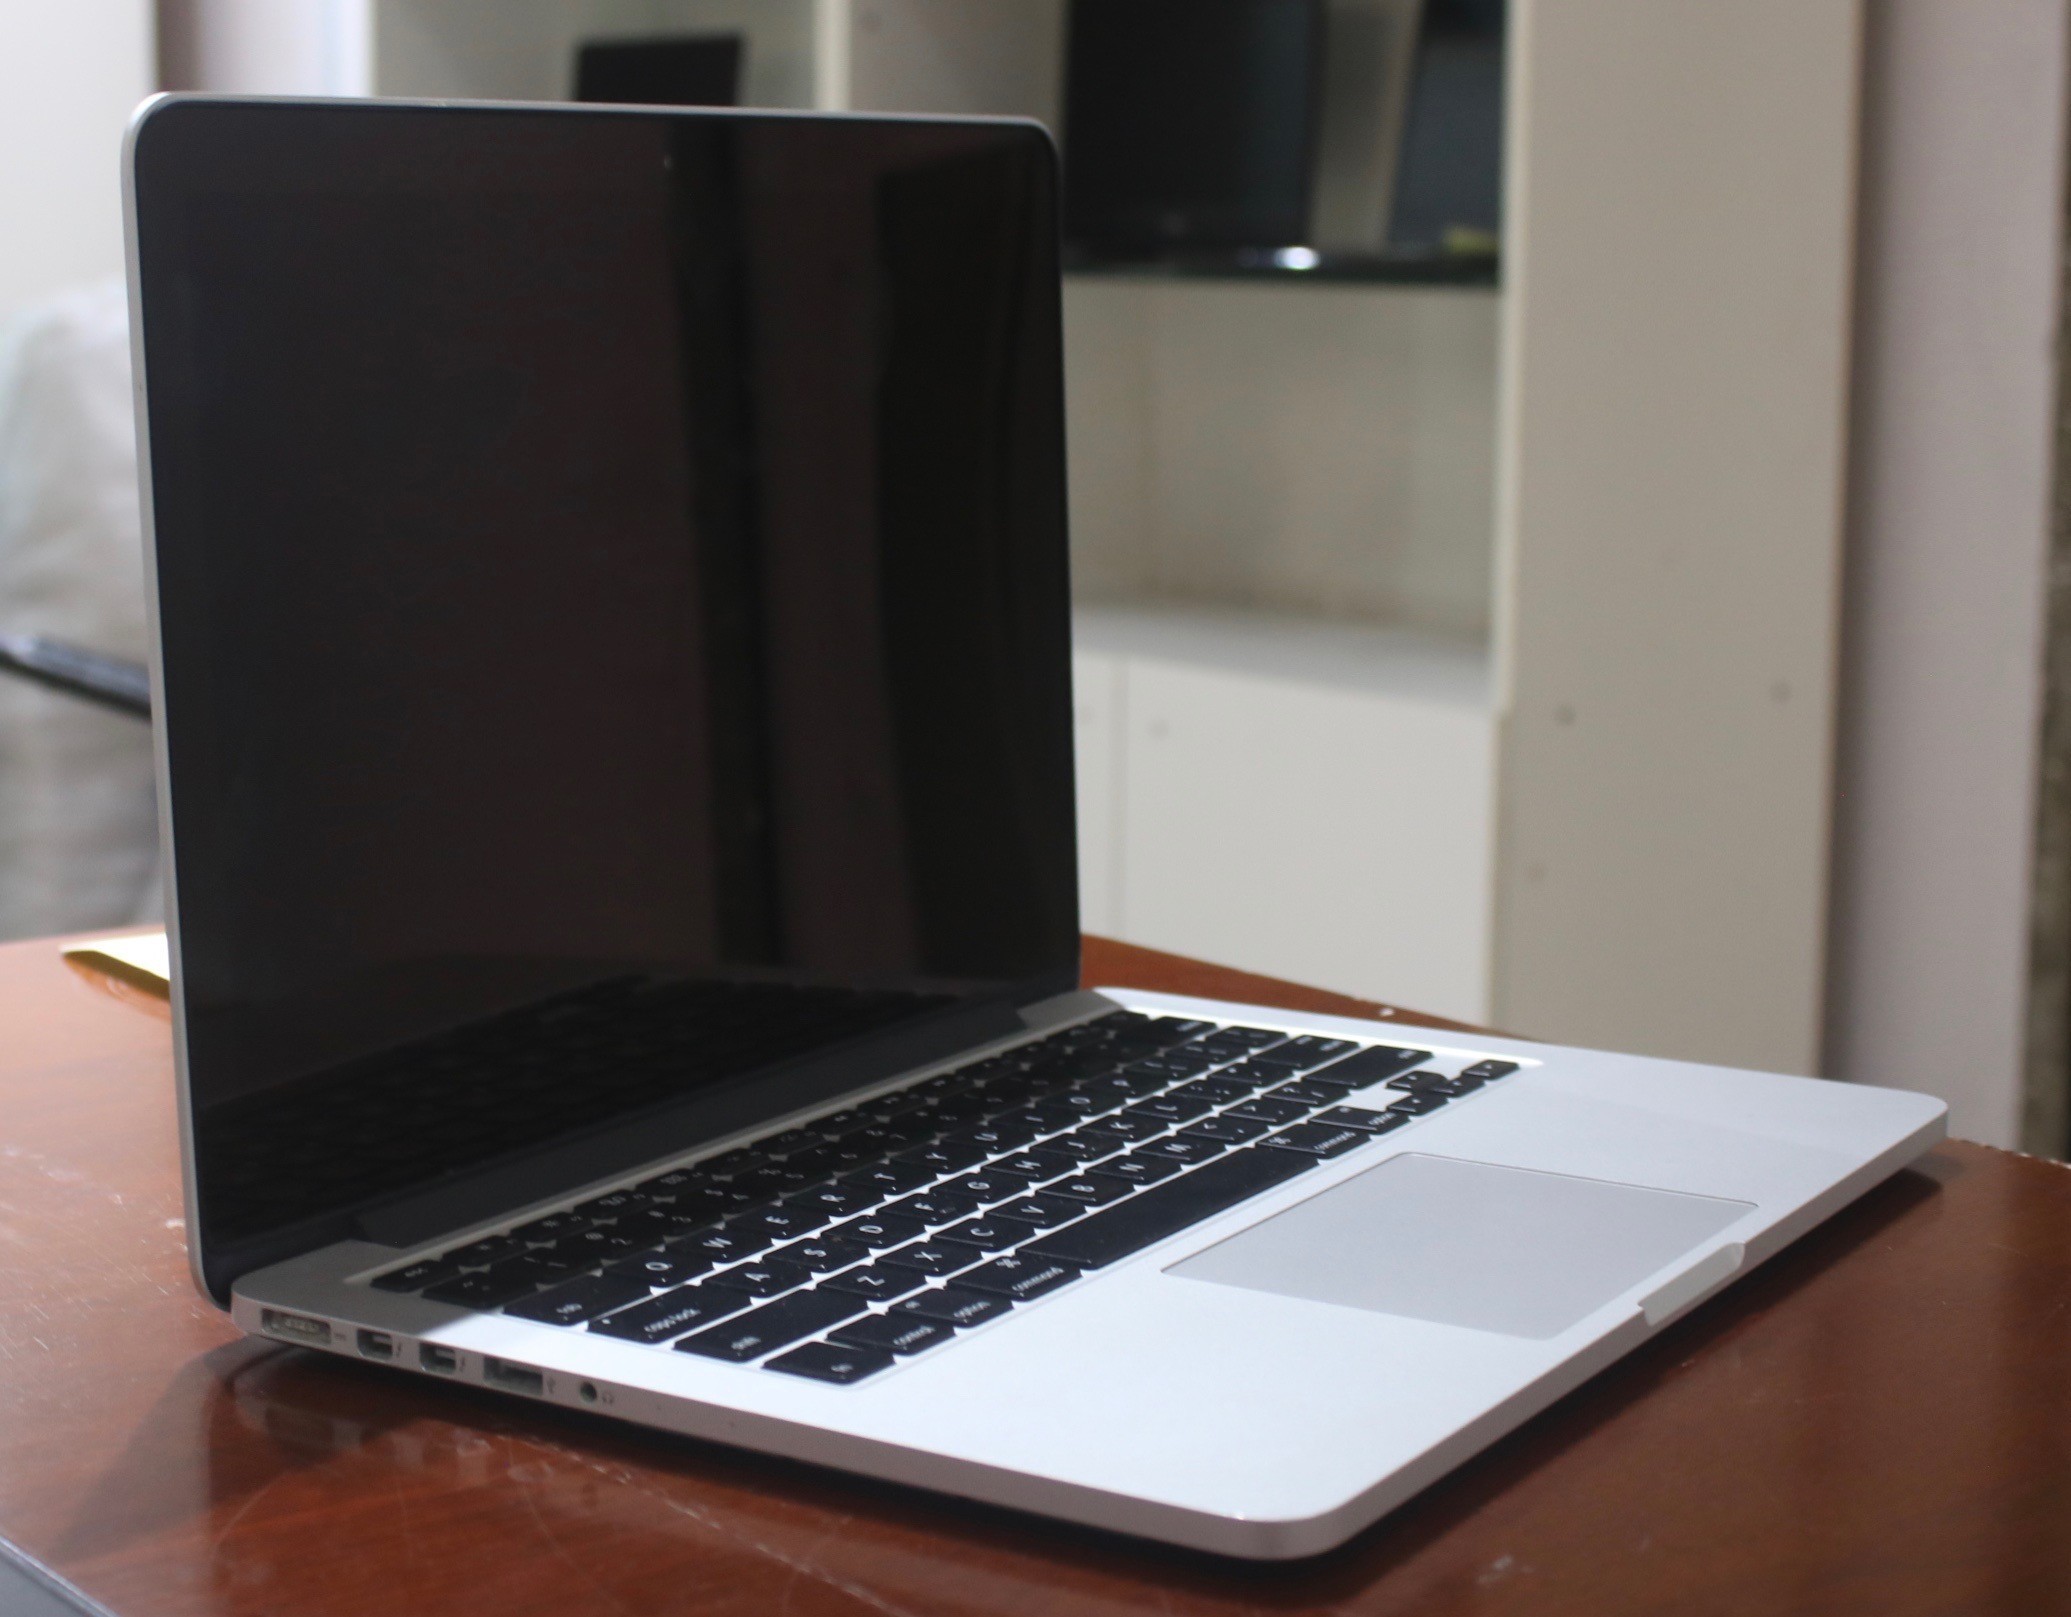 Apple Macbook Pro 2015 model Dual core i7 with 16gb RAM and 256gb